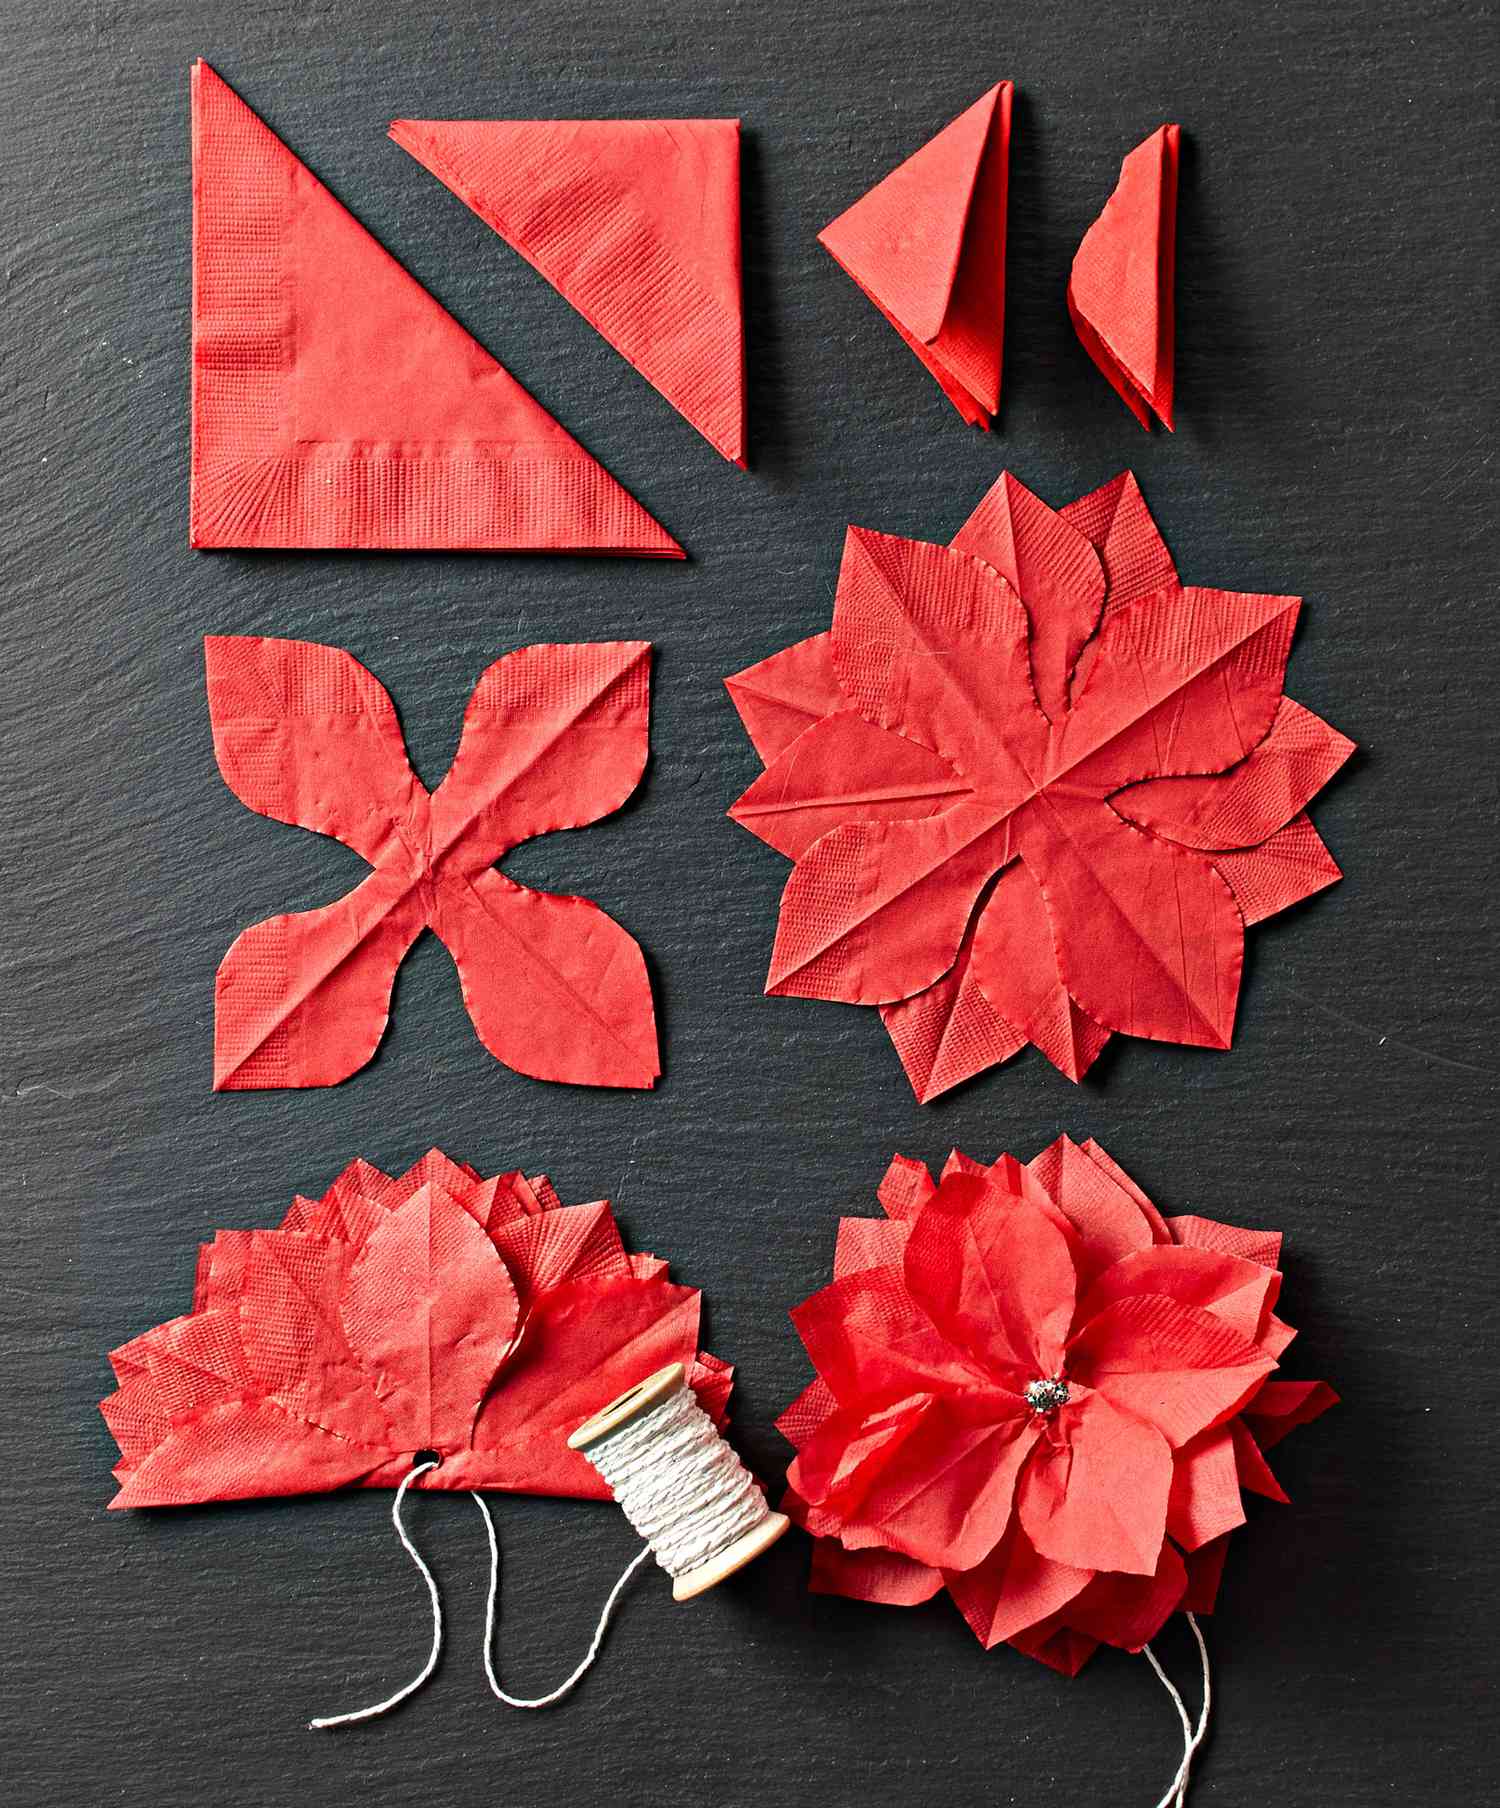 Poinsettias and crafts